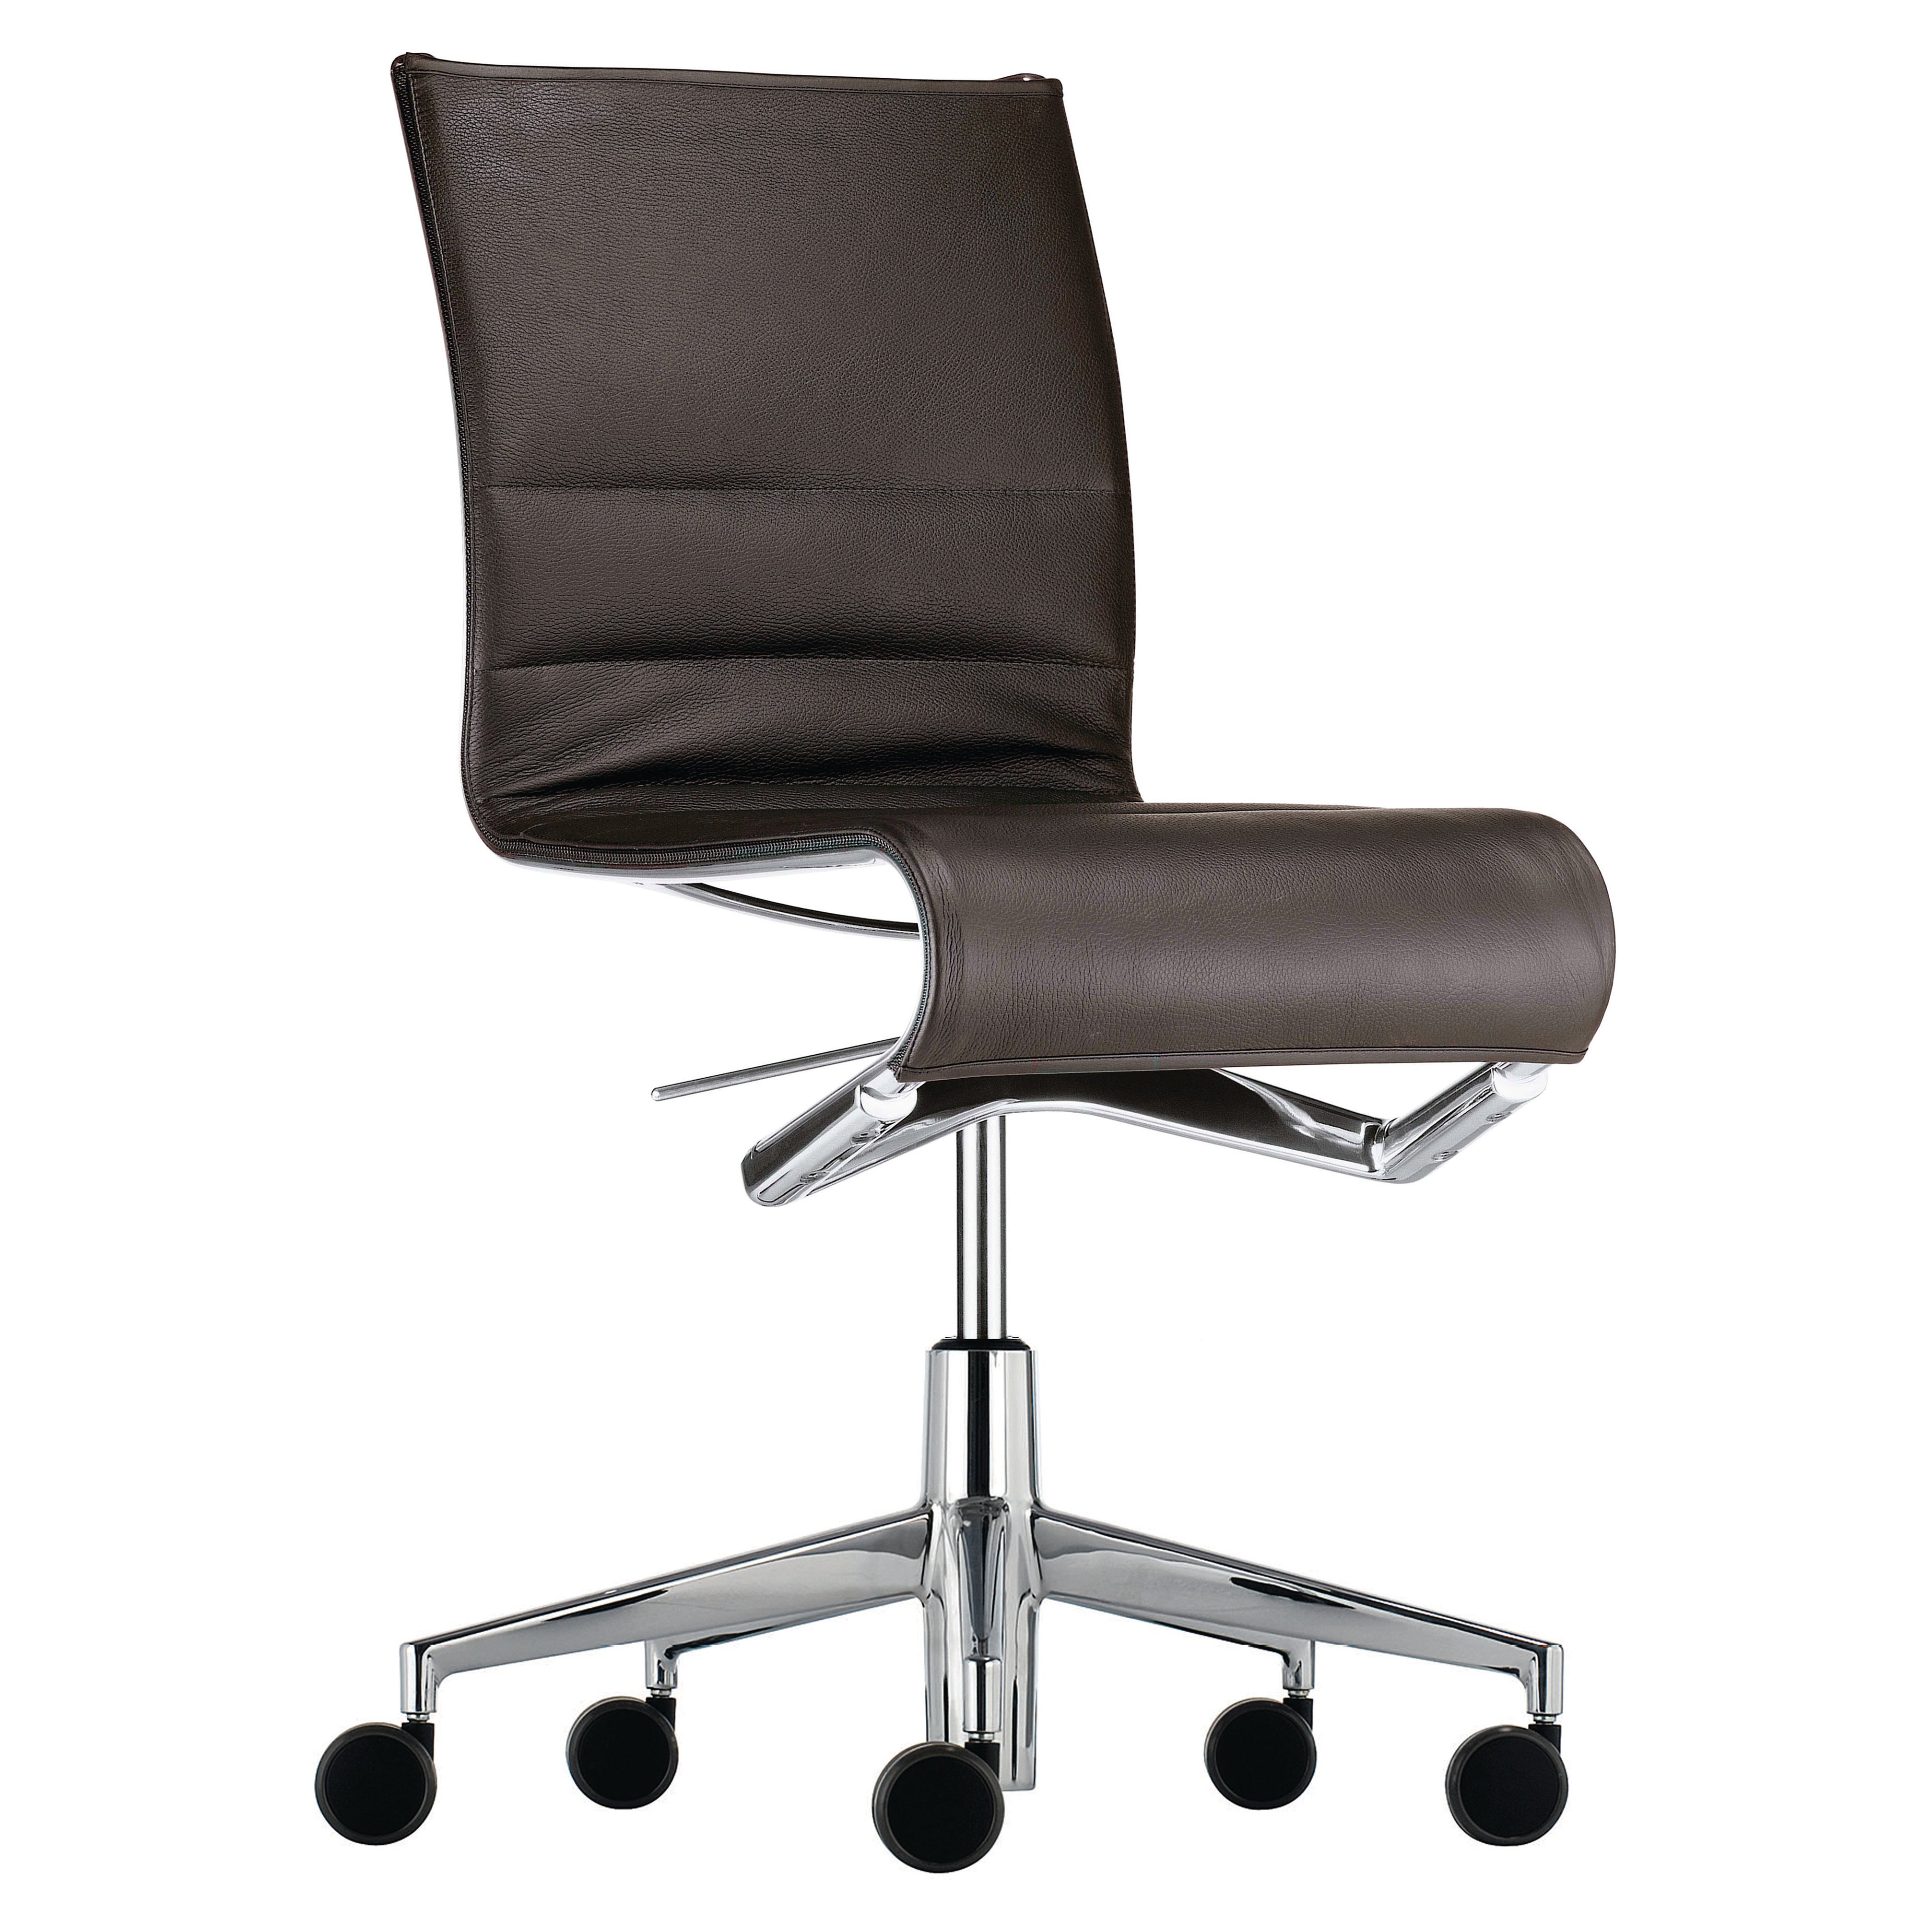 Alias 432 Rollingframe 44 Chair in Brown Leather with Chromed Aluminum Frame For Sale